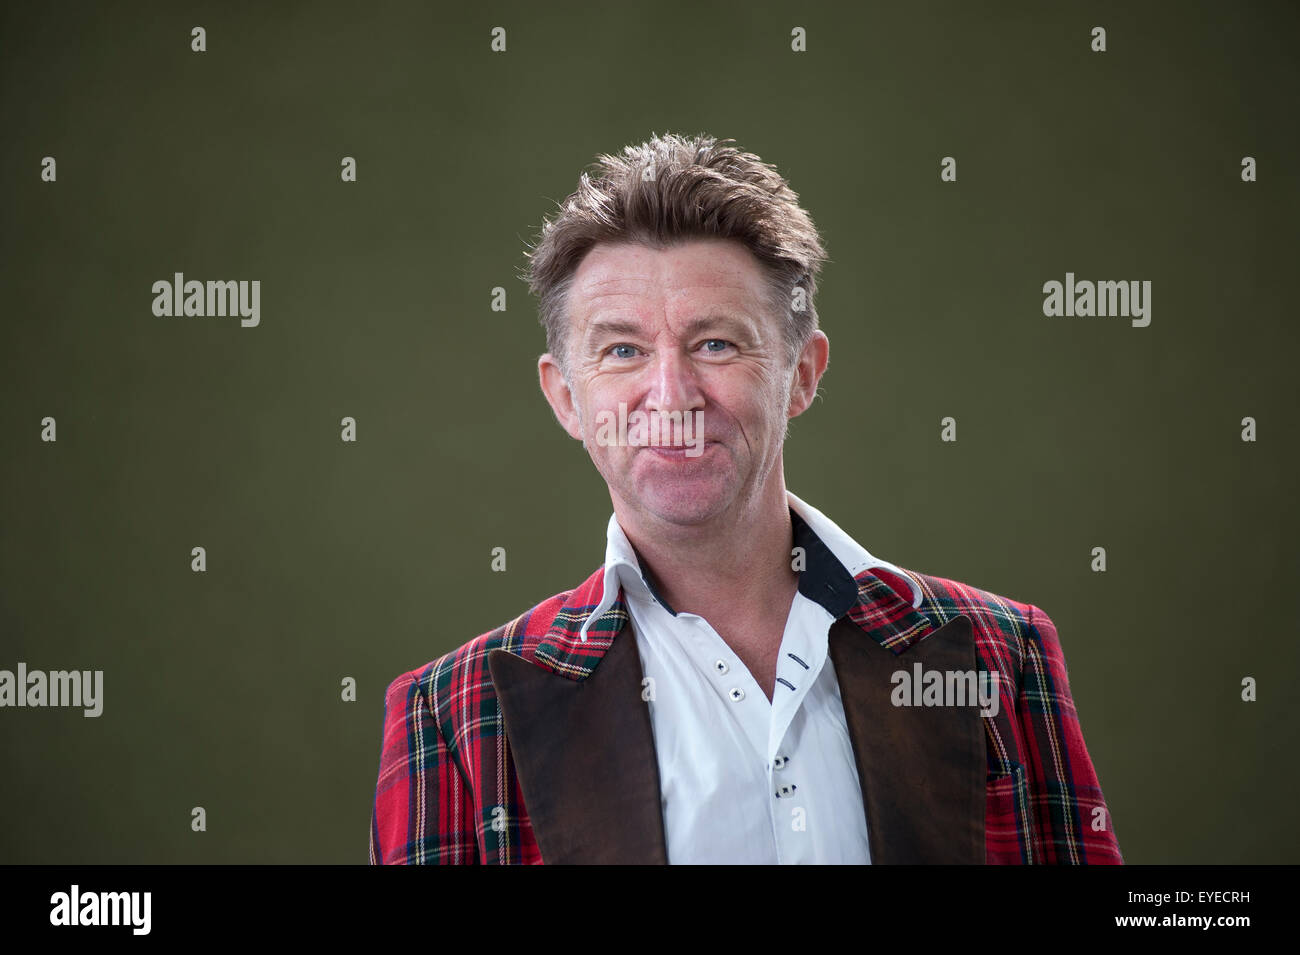 Scottish poet and stand-up comedian, Elvis McGonagall, appearing at the Edinburgh International Book Festival. Stock Photo